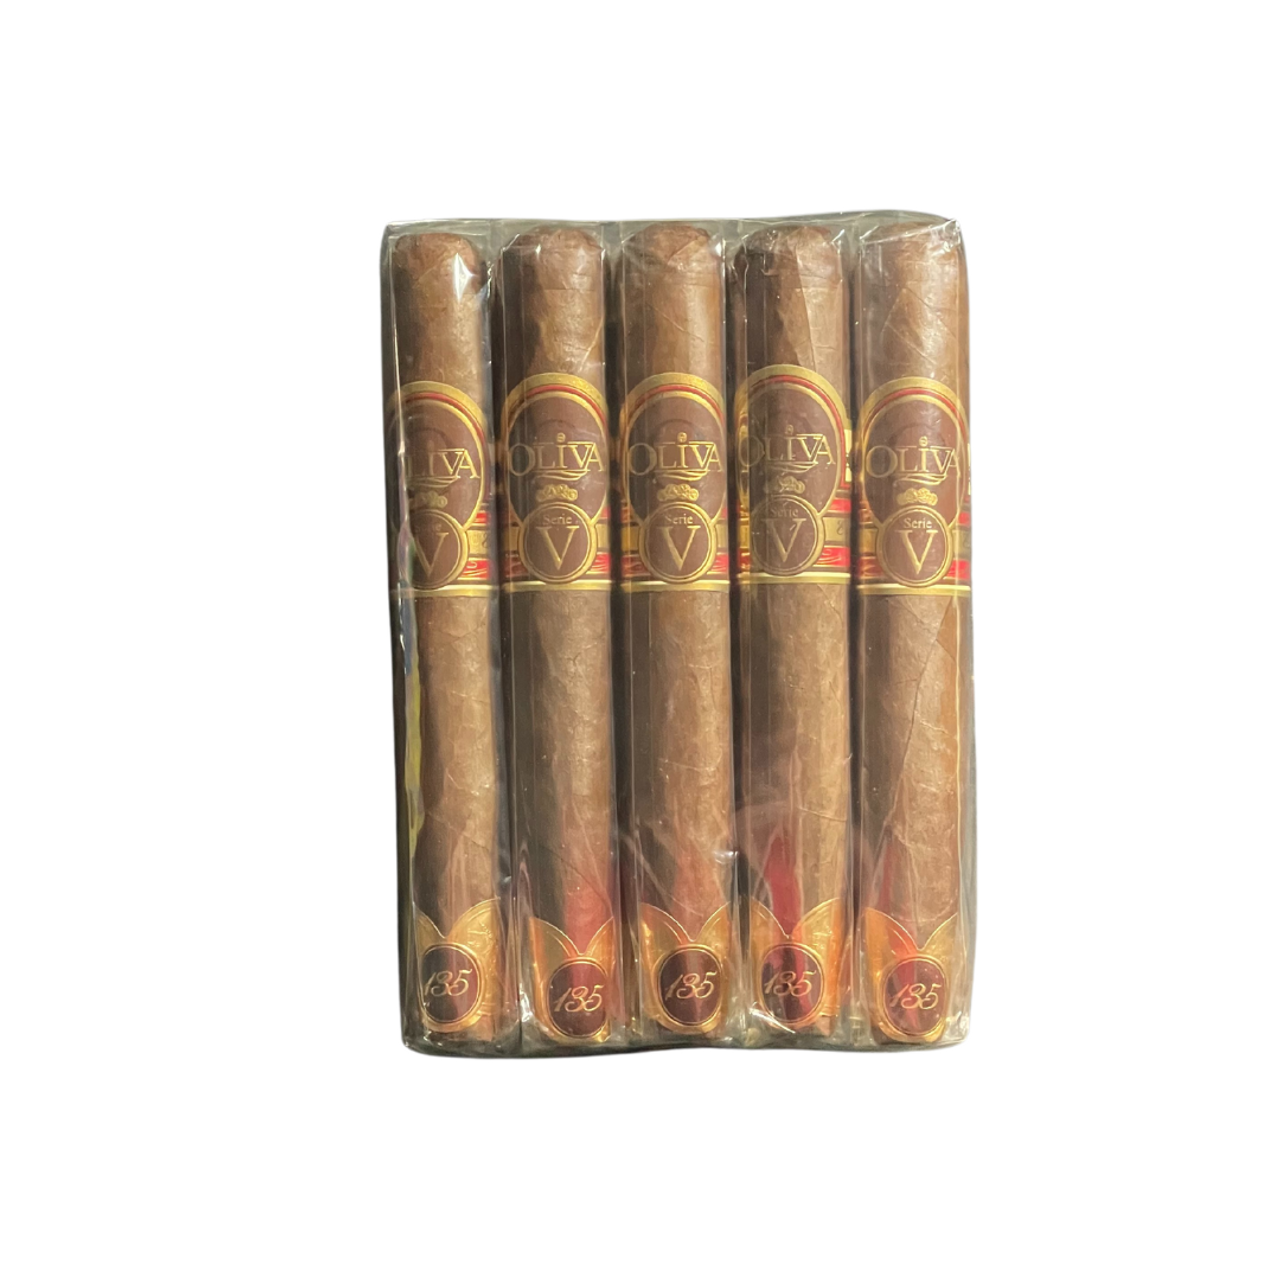 Skip the box & SAVE! Oliva Serie V 135th Aniversario Edicion Real Bundle of 20 priced to move with that free shipping @cigarsamplers.com